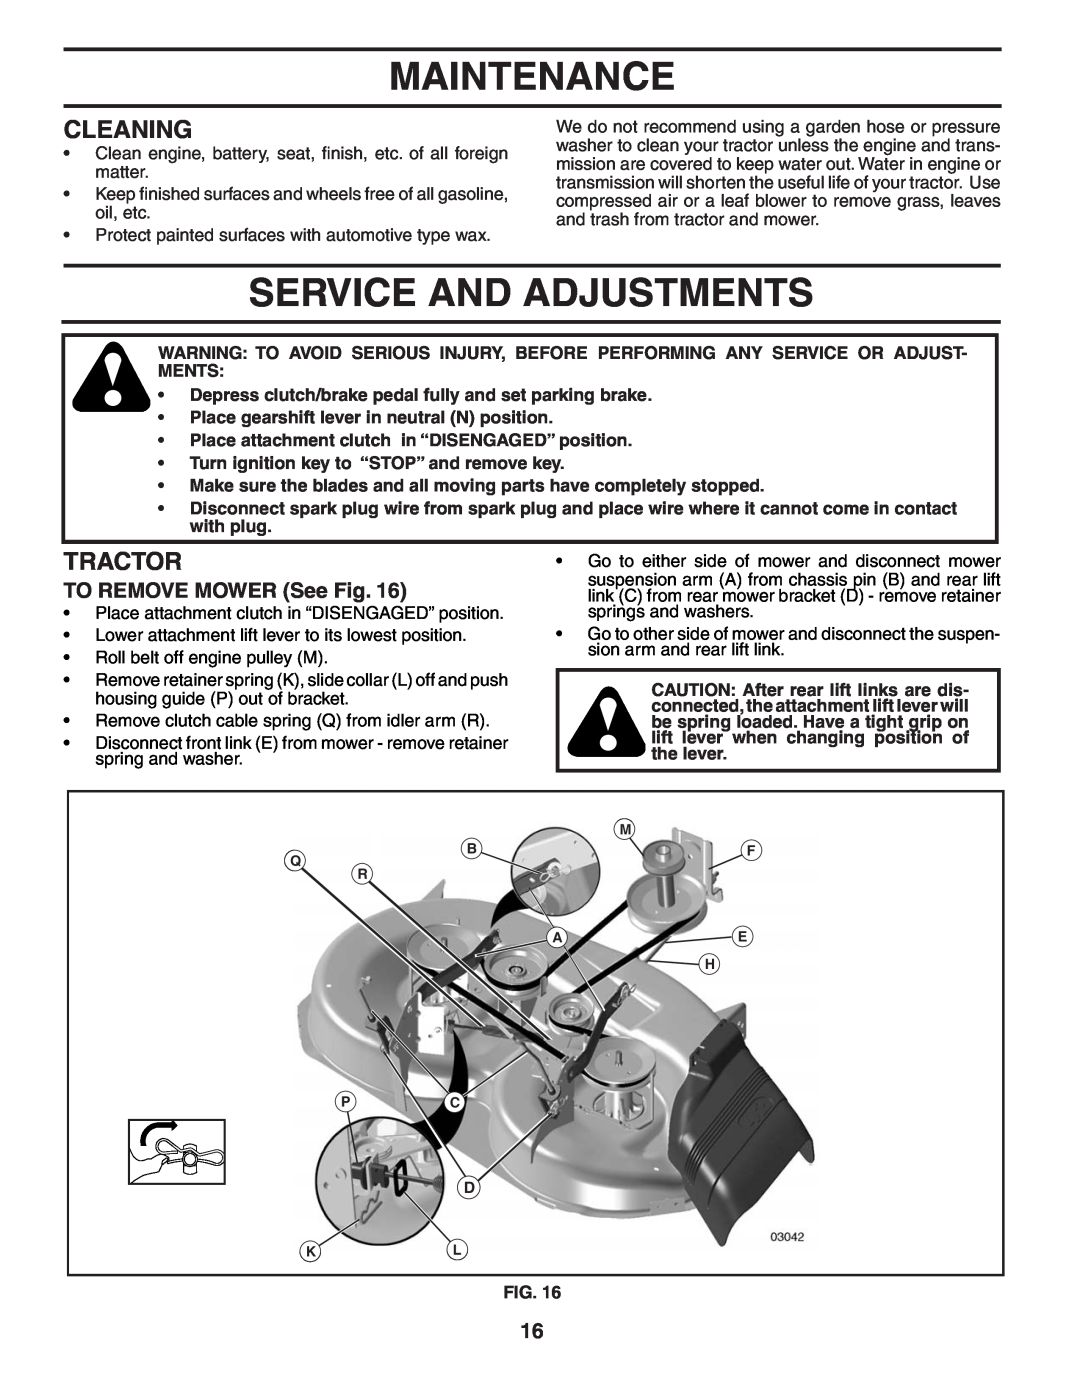 Husqvarna YT1942T owner manual Service And Adjustments, Cleaning, TO REMOVE MOWER See Fig, Maintenance, Tractor 